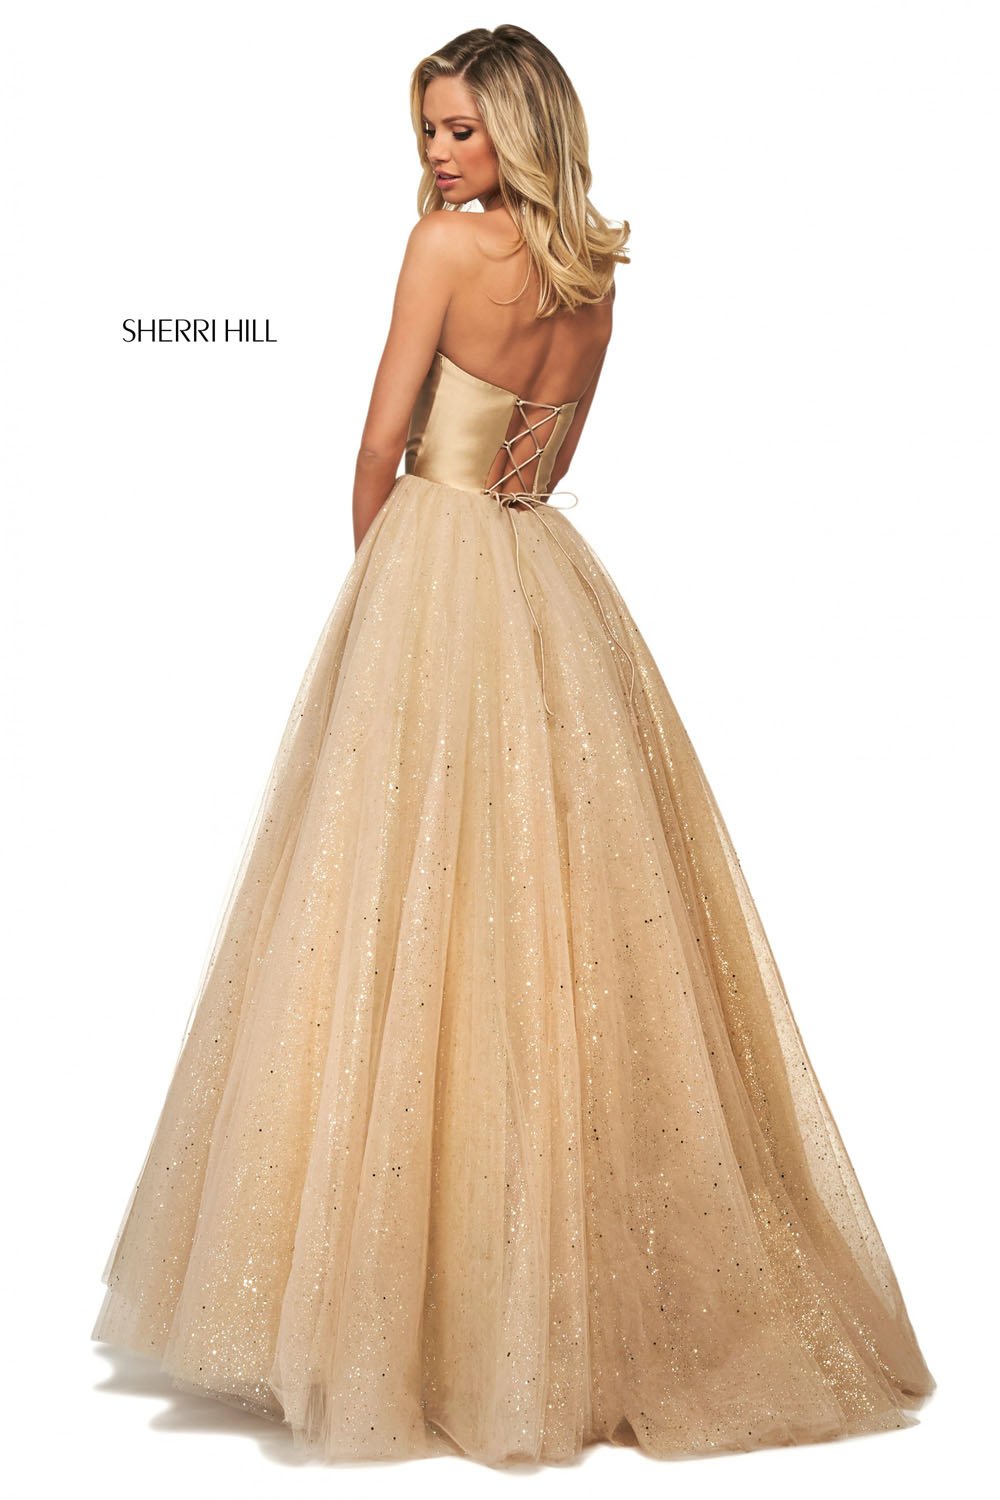 Sherri Hill 53747 dress images in these colors: Gold.